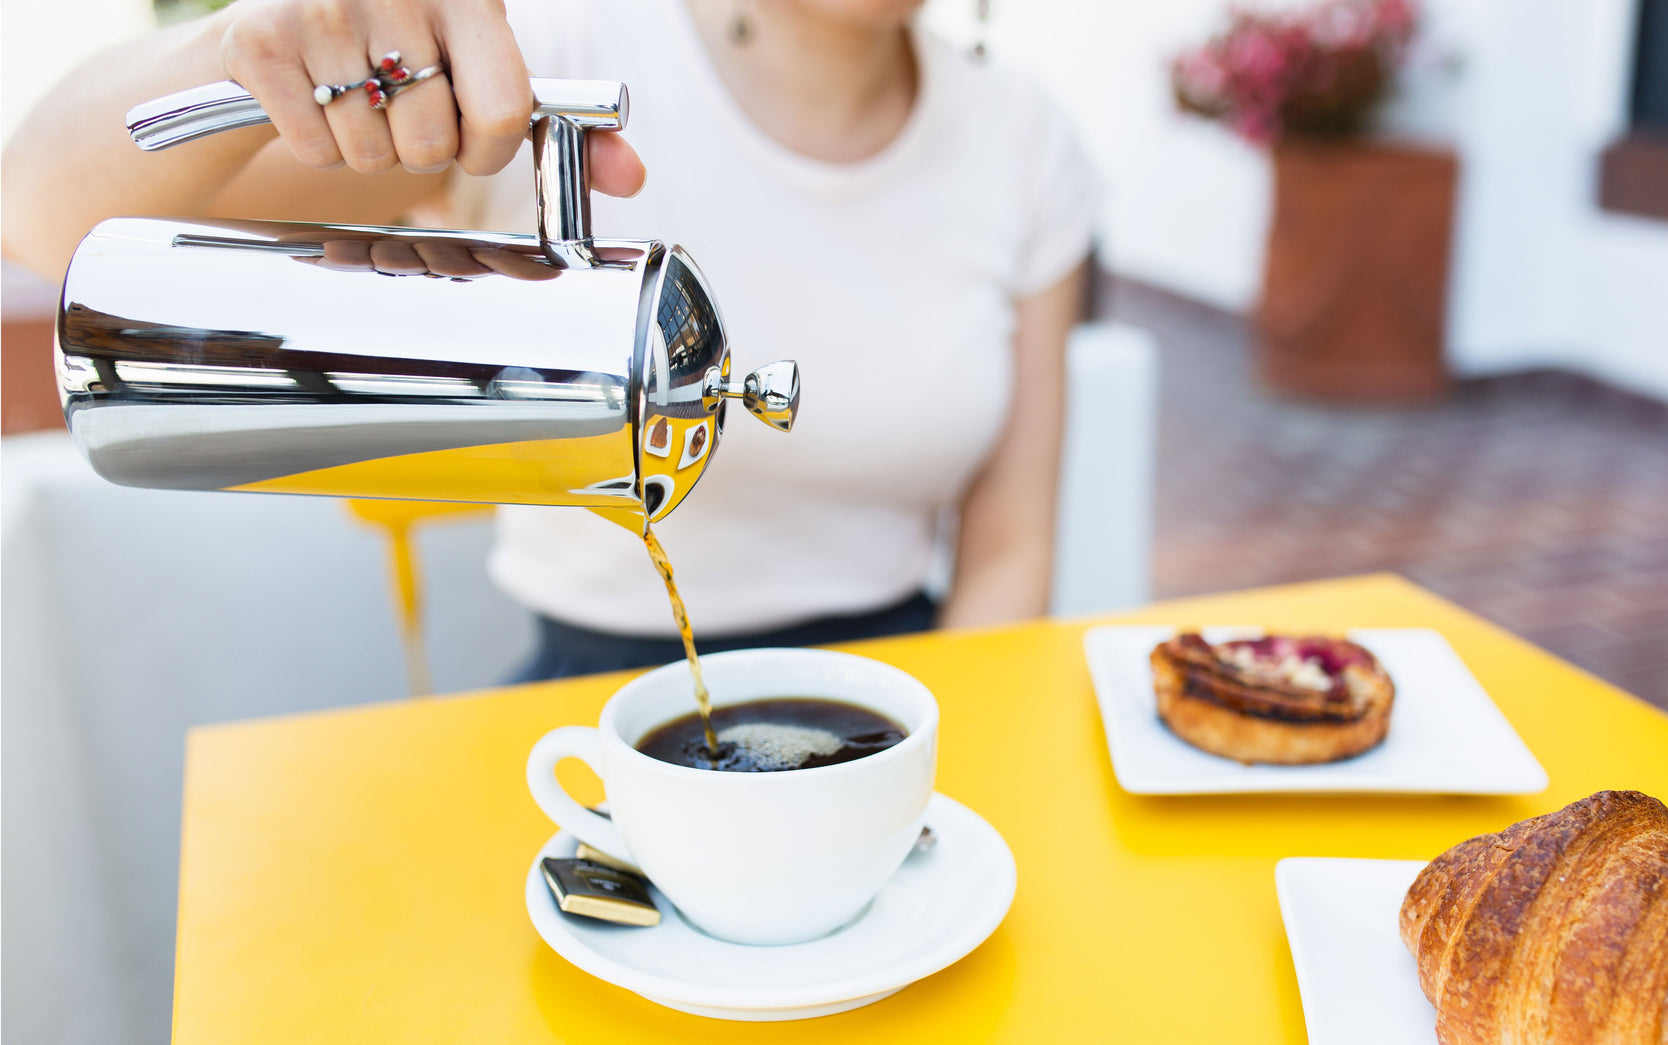 a person seated at a yellow table pouring coffee from a french press into a white coffee cup. there are also pastries on the table